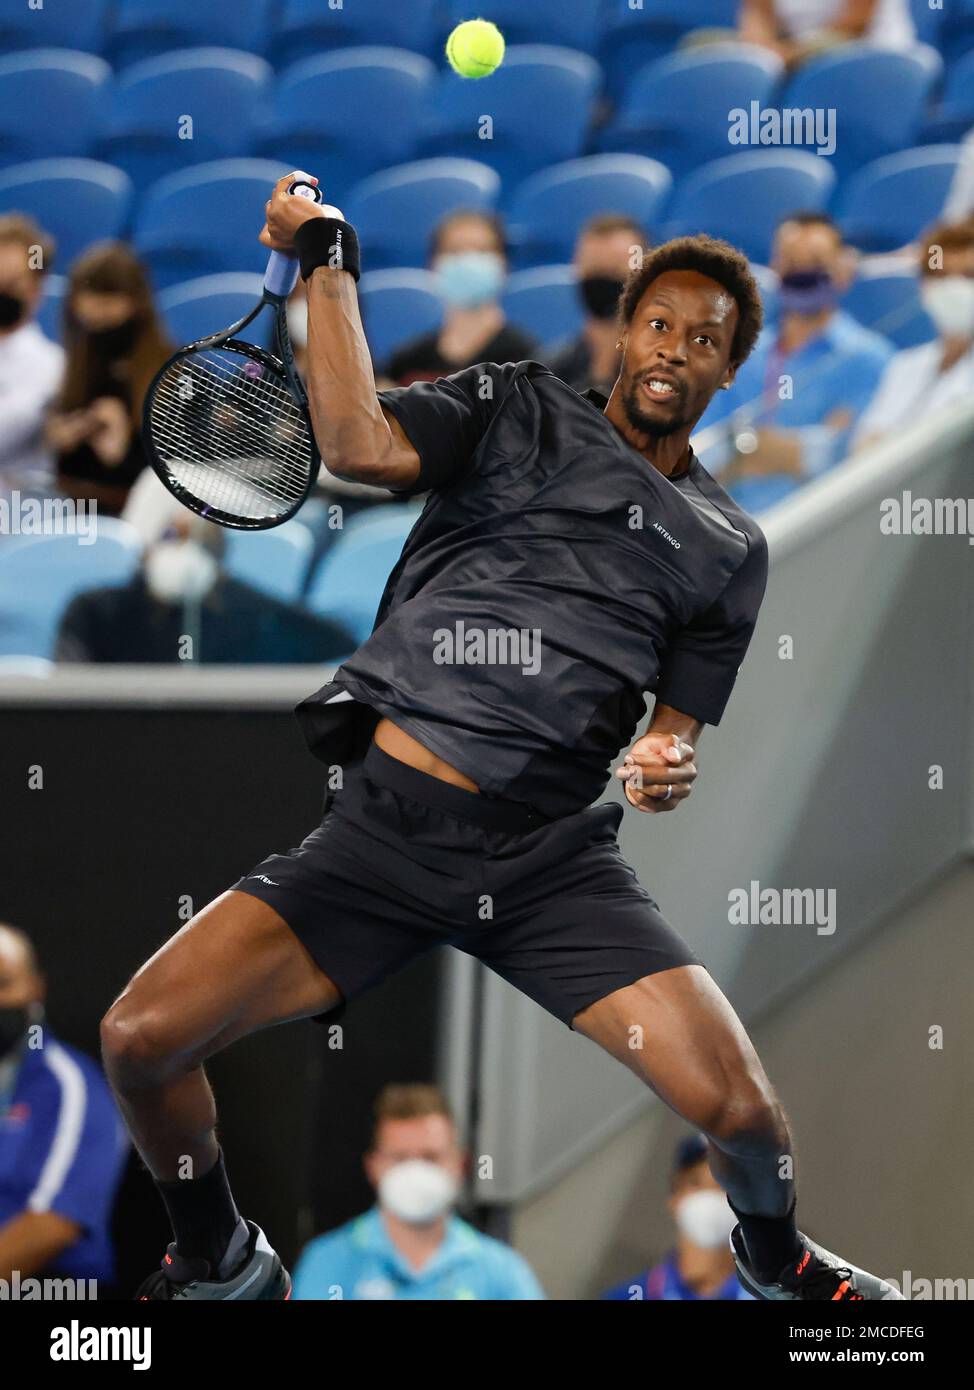 Gael Monfils of France plays a forehand return to Alexander Bublik of Ukraine during their second round match at the Australian Open tennis championships in Melbourne, Australia, Wednesday, Jan